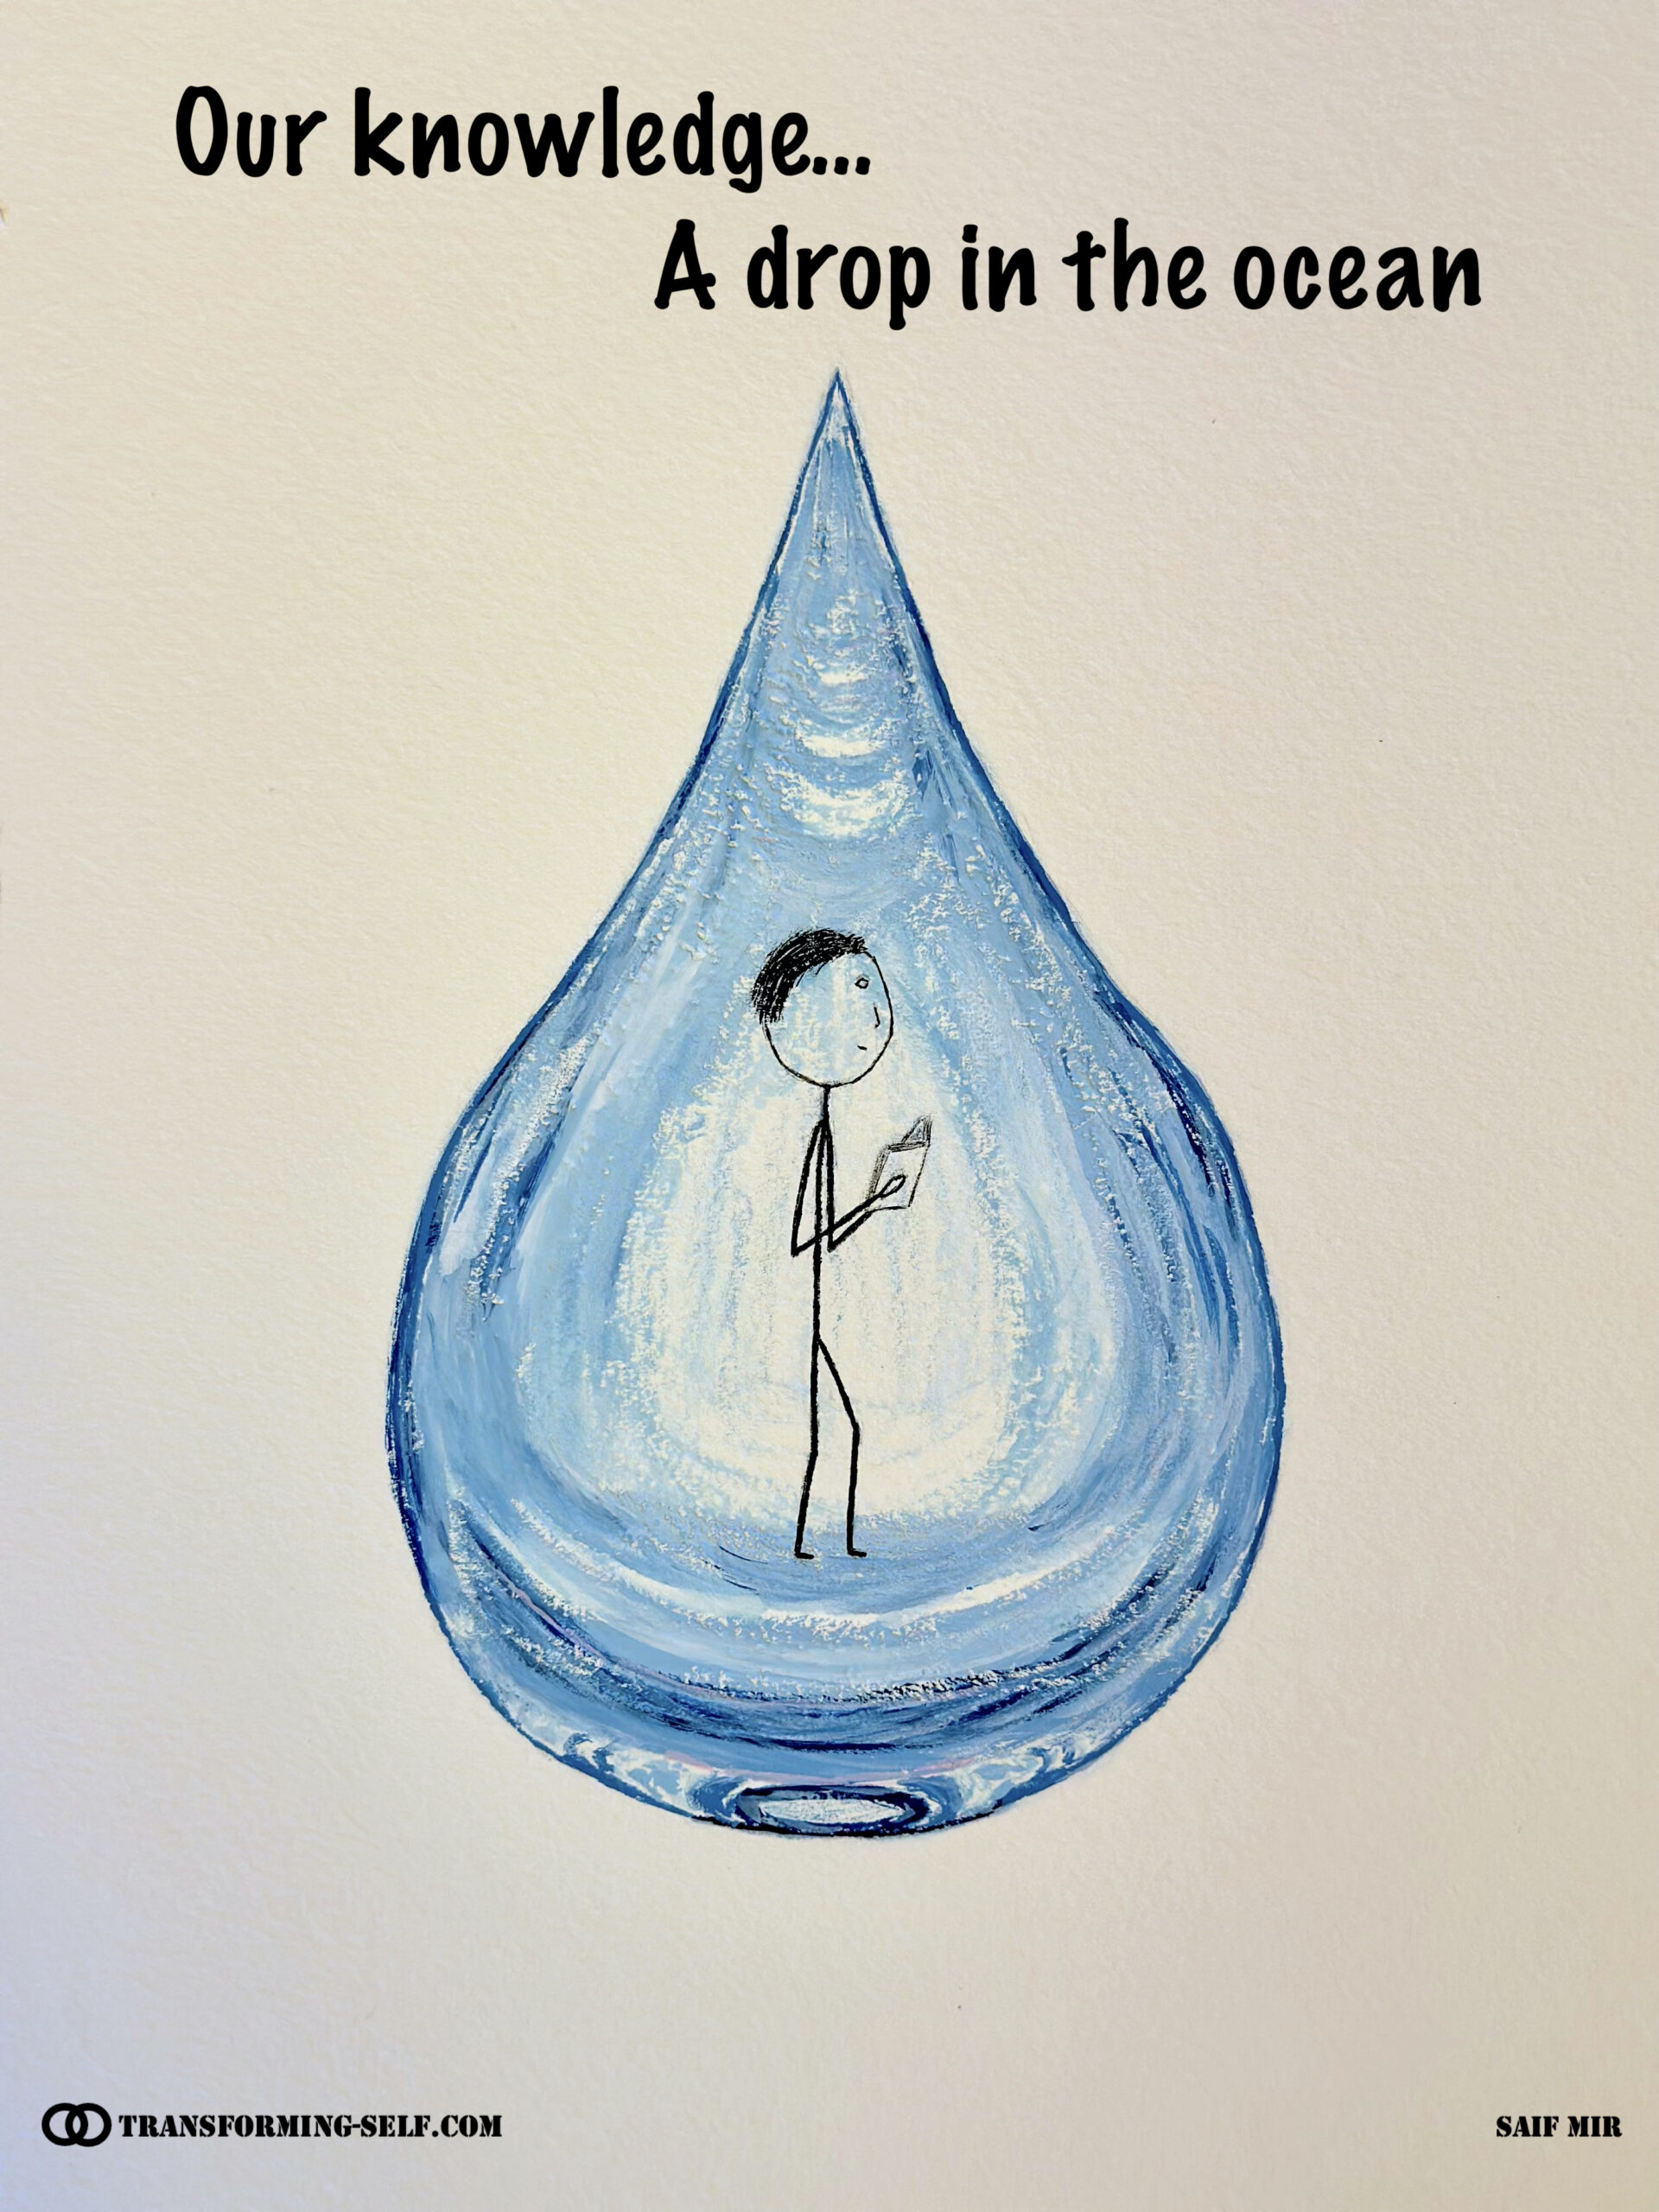 Our knowledge... a drop in the ocean